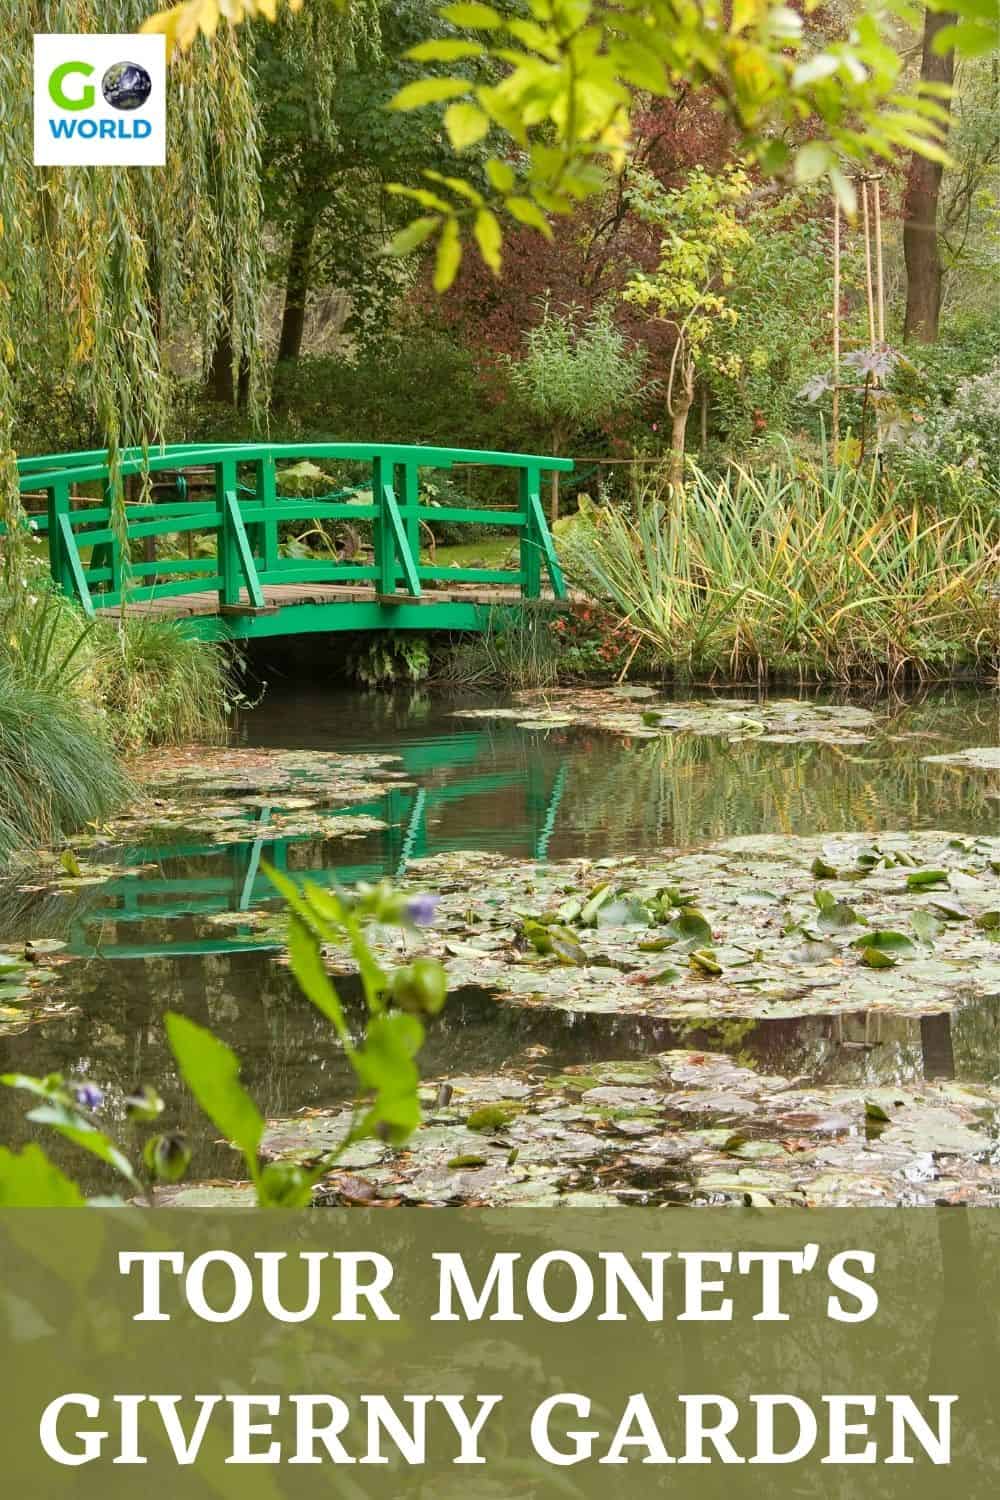 A father and son create special memories on a visit to Monet's Giverny Garden in France, an inviting place of colorful inspiration. #France #Monet #Monetsgivernygarden